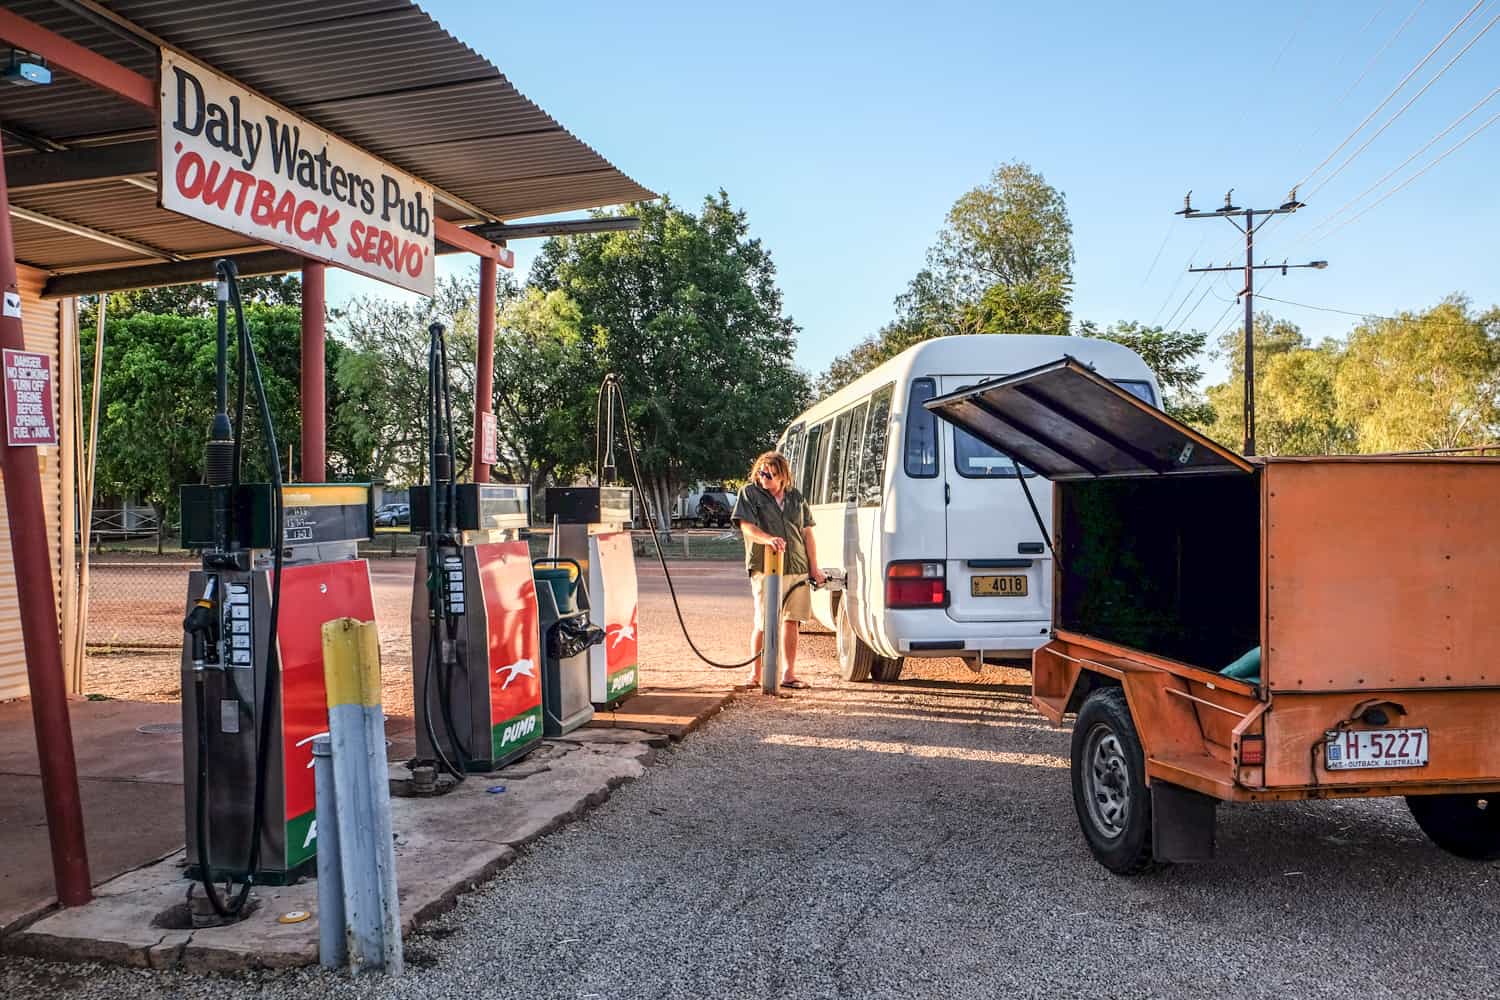 A man fills a white van with petrol at the 'Outback Servo' in Daly Waters Australia. 